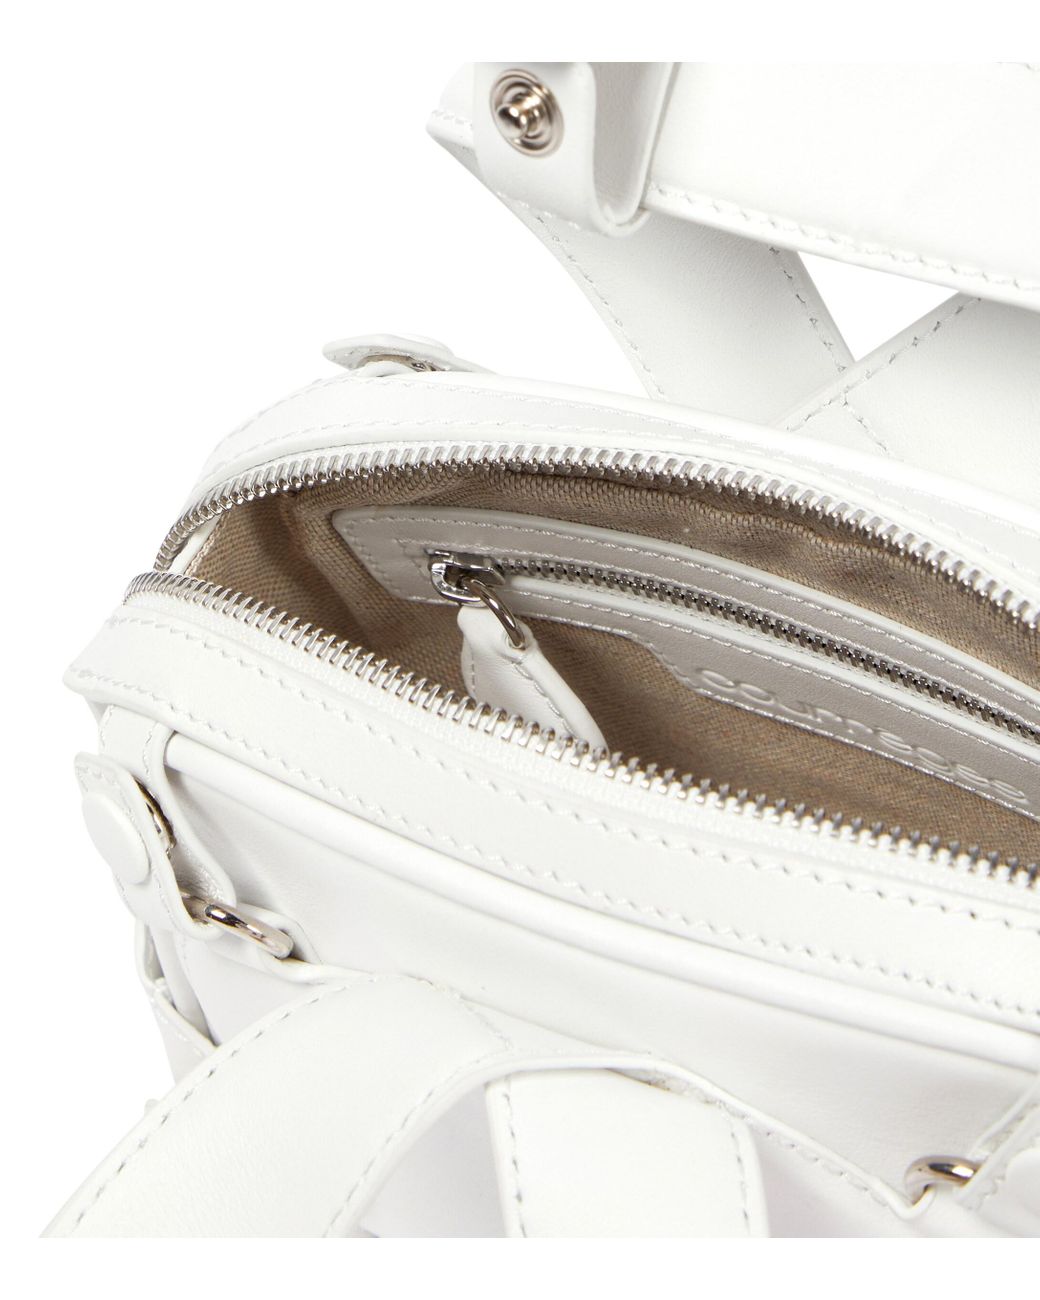 Courreges X Loop Baguette Bag in White Leather ref.665064 - Joli